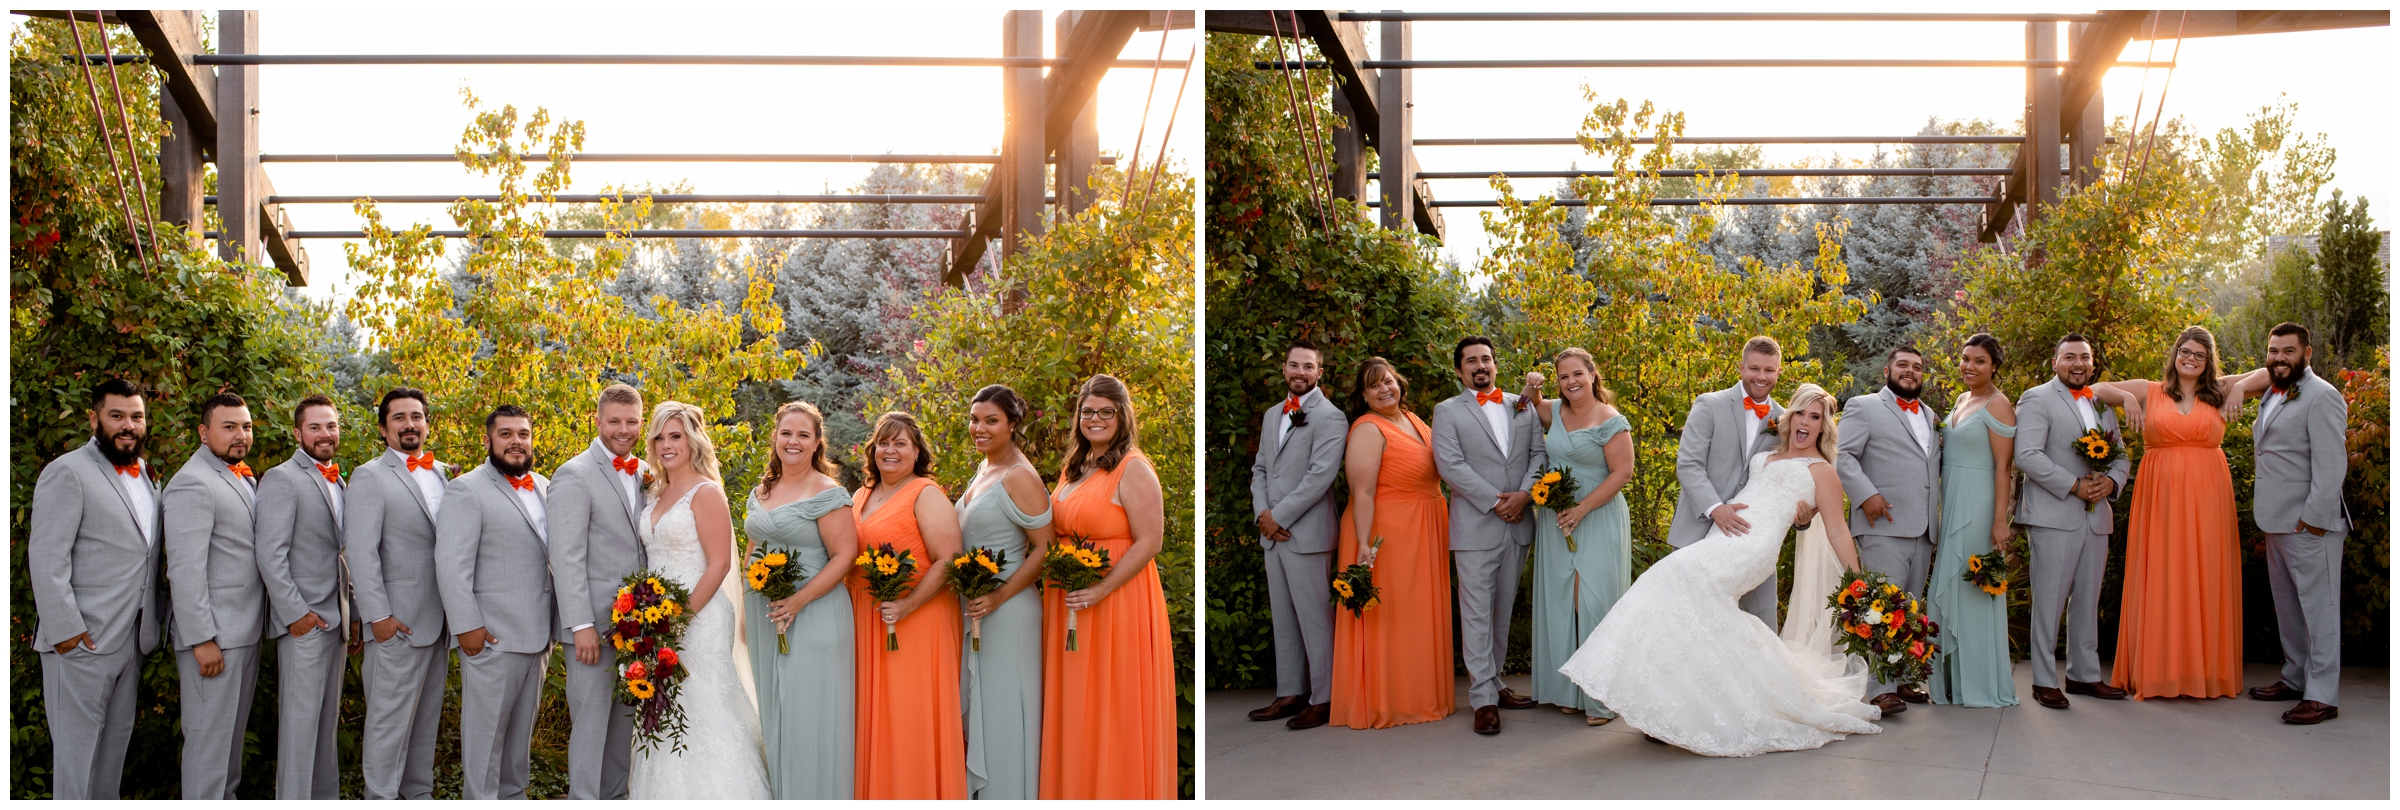 bridal party in sage and orange 